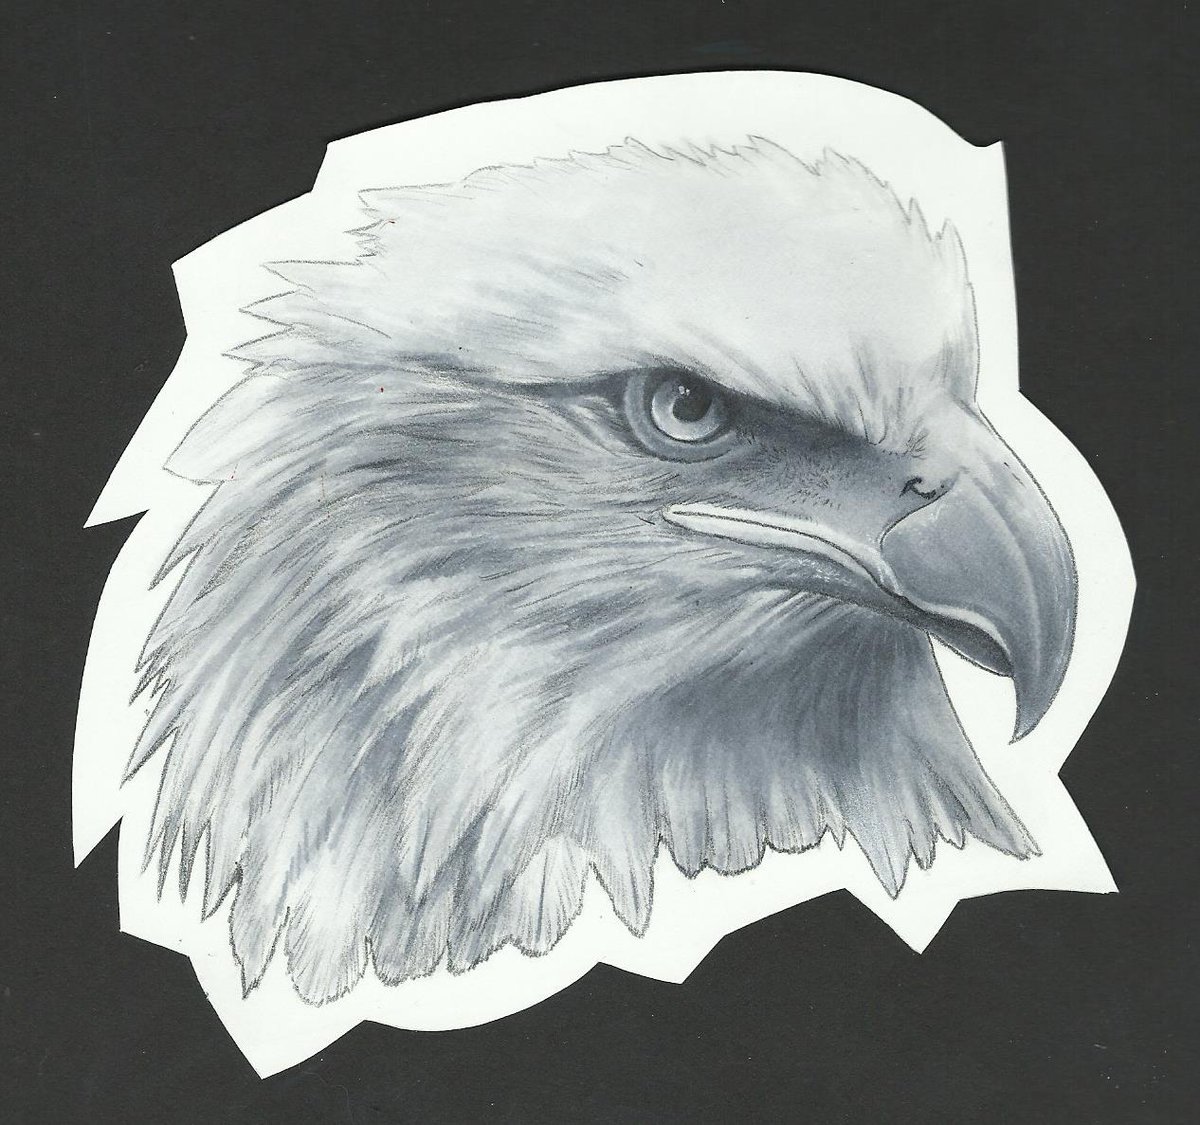 My next rendering texture study: Animal. For this, I did a eagle. #rendering #texturestudy #eagle #baldeagle #baldeagleart #traditionalart #eaglehead